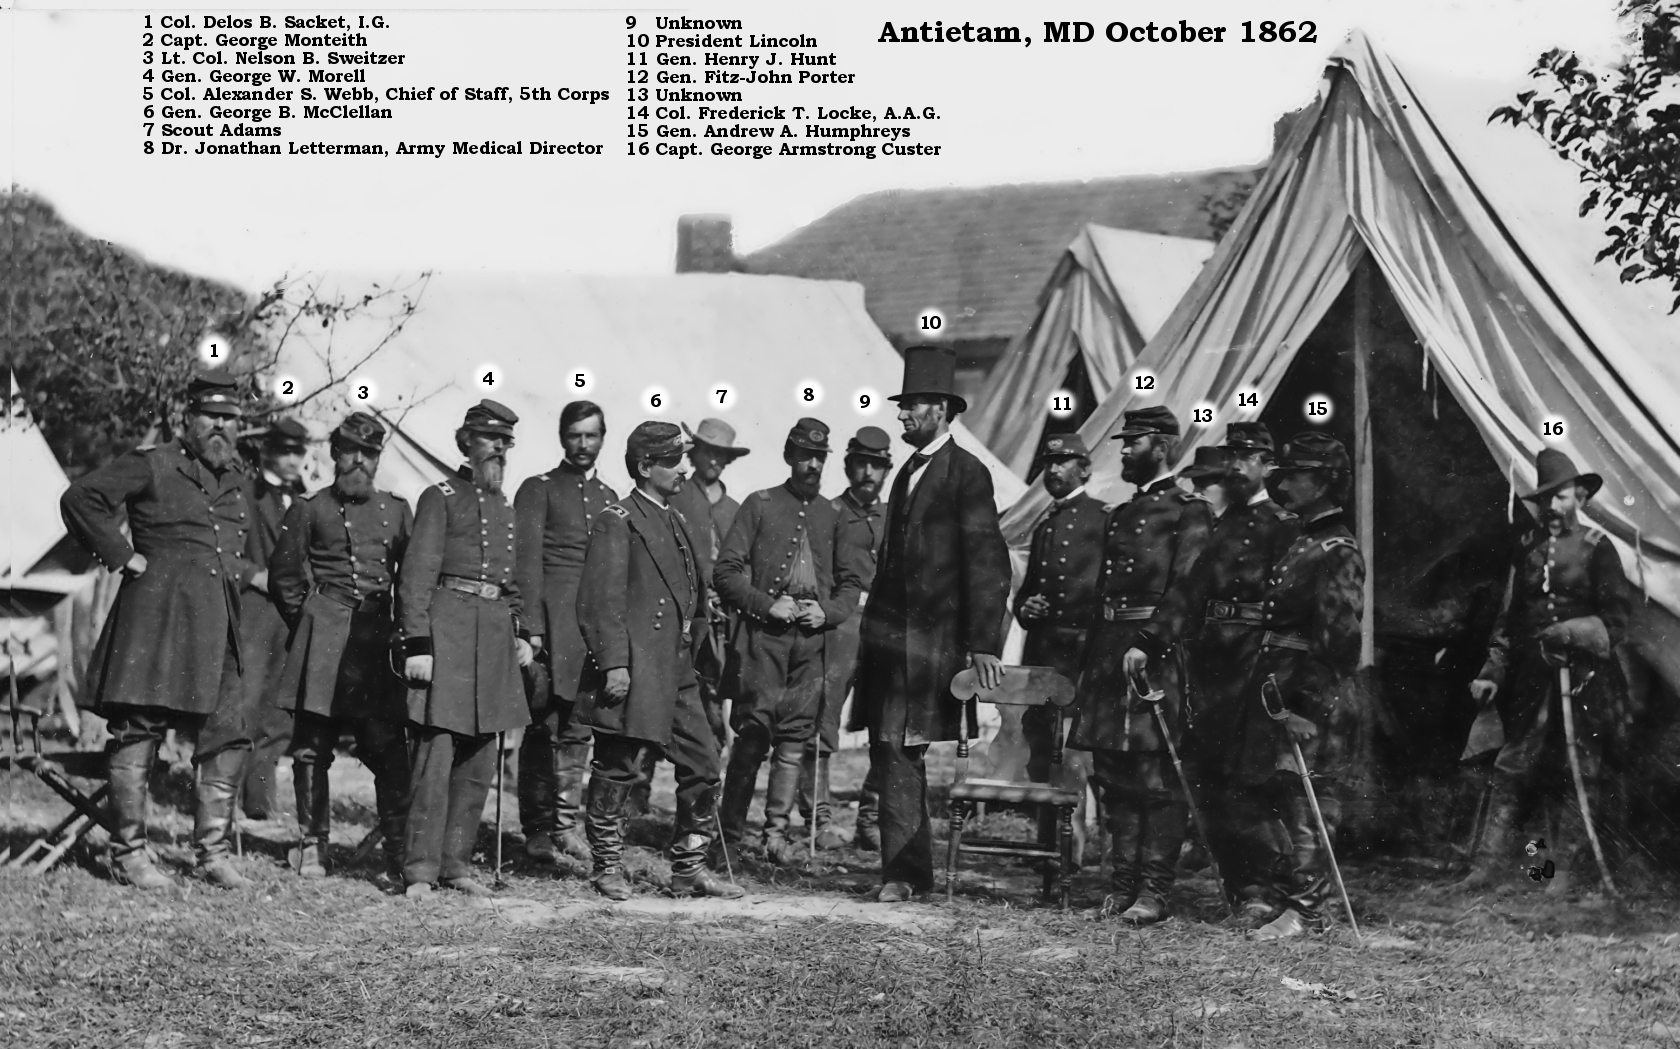 Photograph from the main eastern theater of the war, Battle of Antietam, September-October 1862. 1. Col. Delos B. Sacket, I.G. 2. Capt. George Monteith. 3. Lt. Col. Nelson B. Sweitzer. 4. Gen. George W. Morell. 5. Col. Alexander S. Webb, Chief of Staff, 5th Corps. 6. Gen. George B. McClellan. 7. Scout Adams. 8. Dr. Jonathan Letterman, Army Medical Director. 9. Unknown. 10. President Lincoln. 11. Gen. Henry J. Hunt. 12. Gen. Fitz-John Porter. 13. Unknown. 14. Col. Frederick T. Locke, A.A.G. 15. Gen. Andrew A. Humphreys. 16. Capt. George Armstrong Custer.
[There is someone inside the tent.]

I cleaned the image up a bit and added the legend.

The original is here: http://tinyurl.com/5xzb5p
